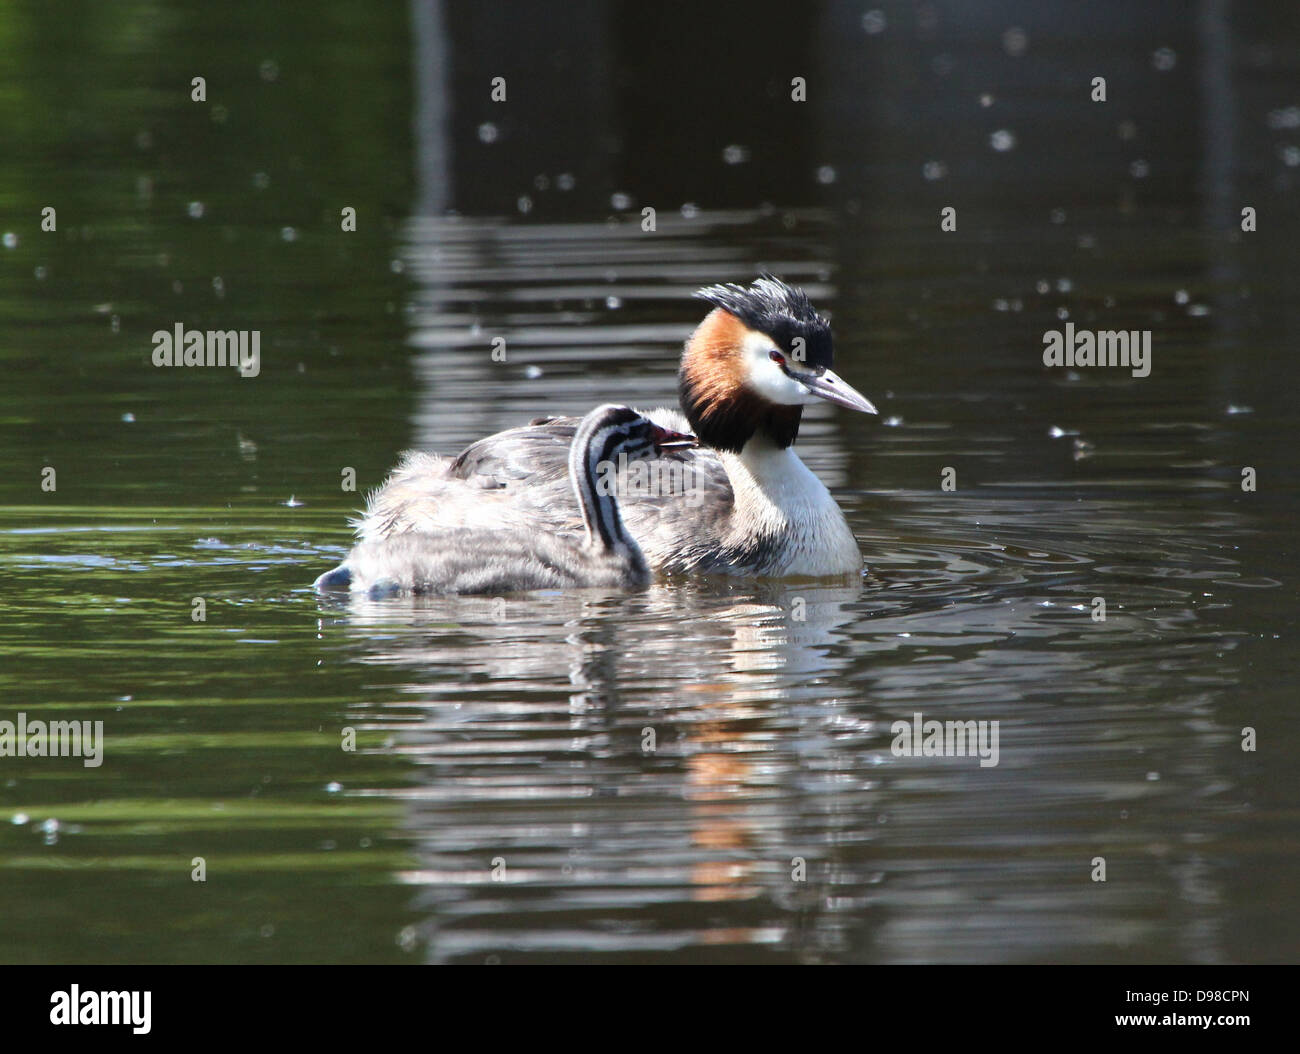 Great Crested Grebes (Podiceps cristatus) with grebes riding piggy-back & being fed by their parents (over 30 images in series) Stock Photo